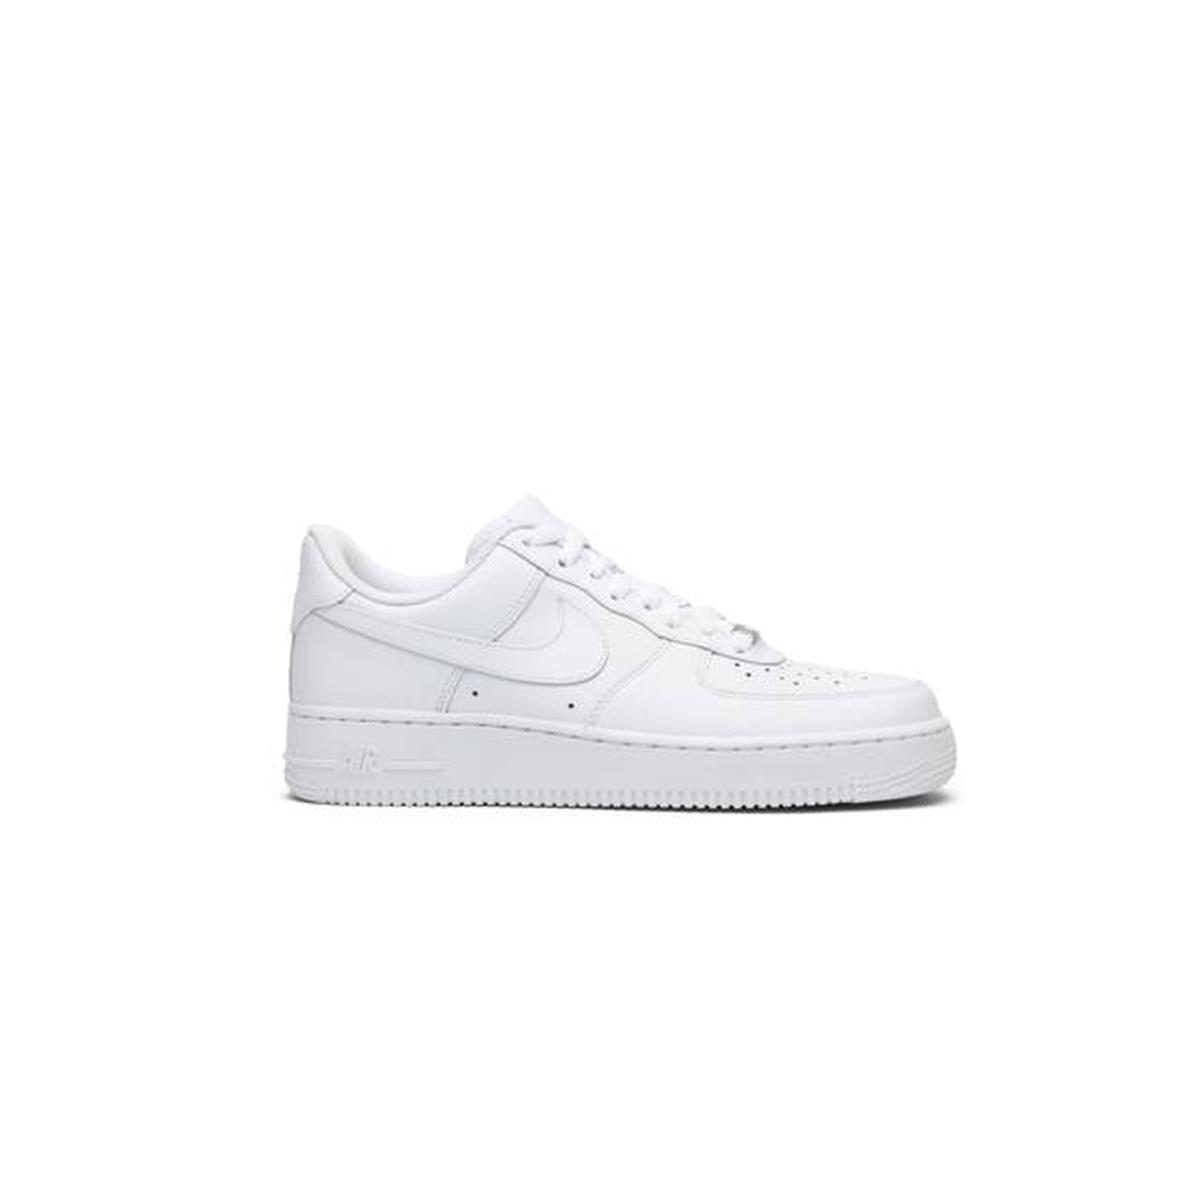 Nike Air Force 1 One Low `07 Men`s Retro Classic Shoes CW2288-001 White